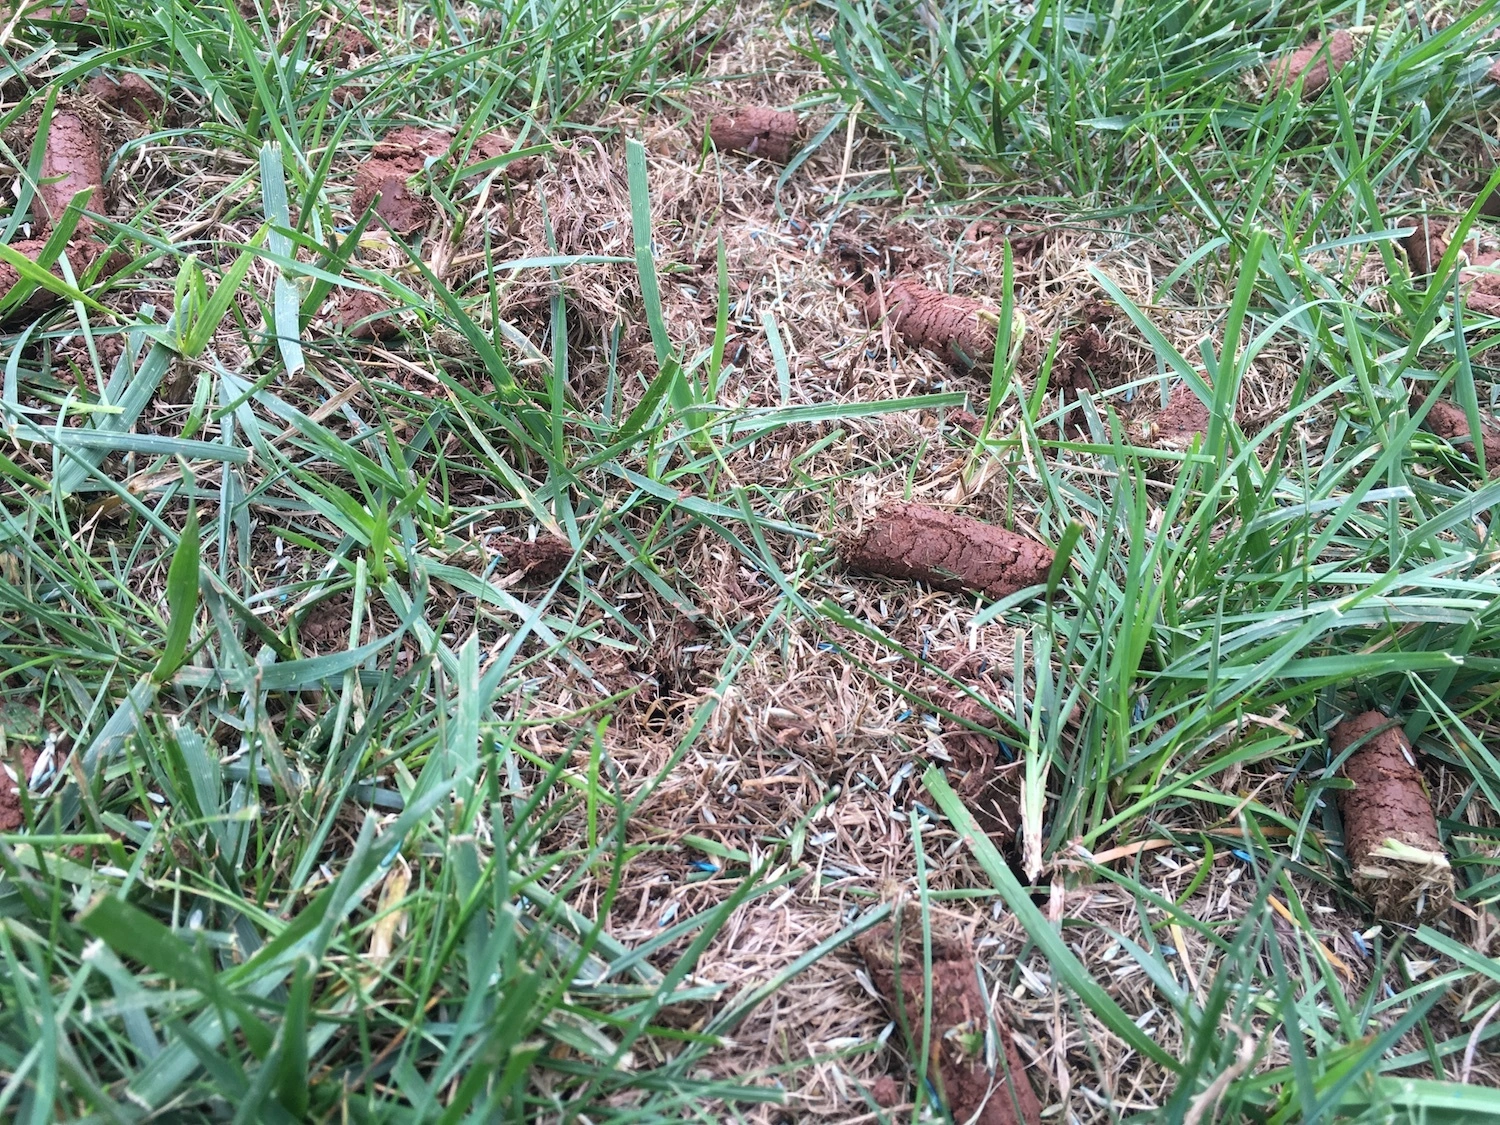 grass with plugs from aeration and seed